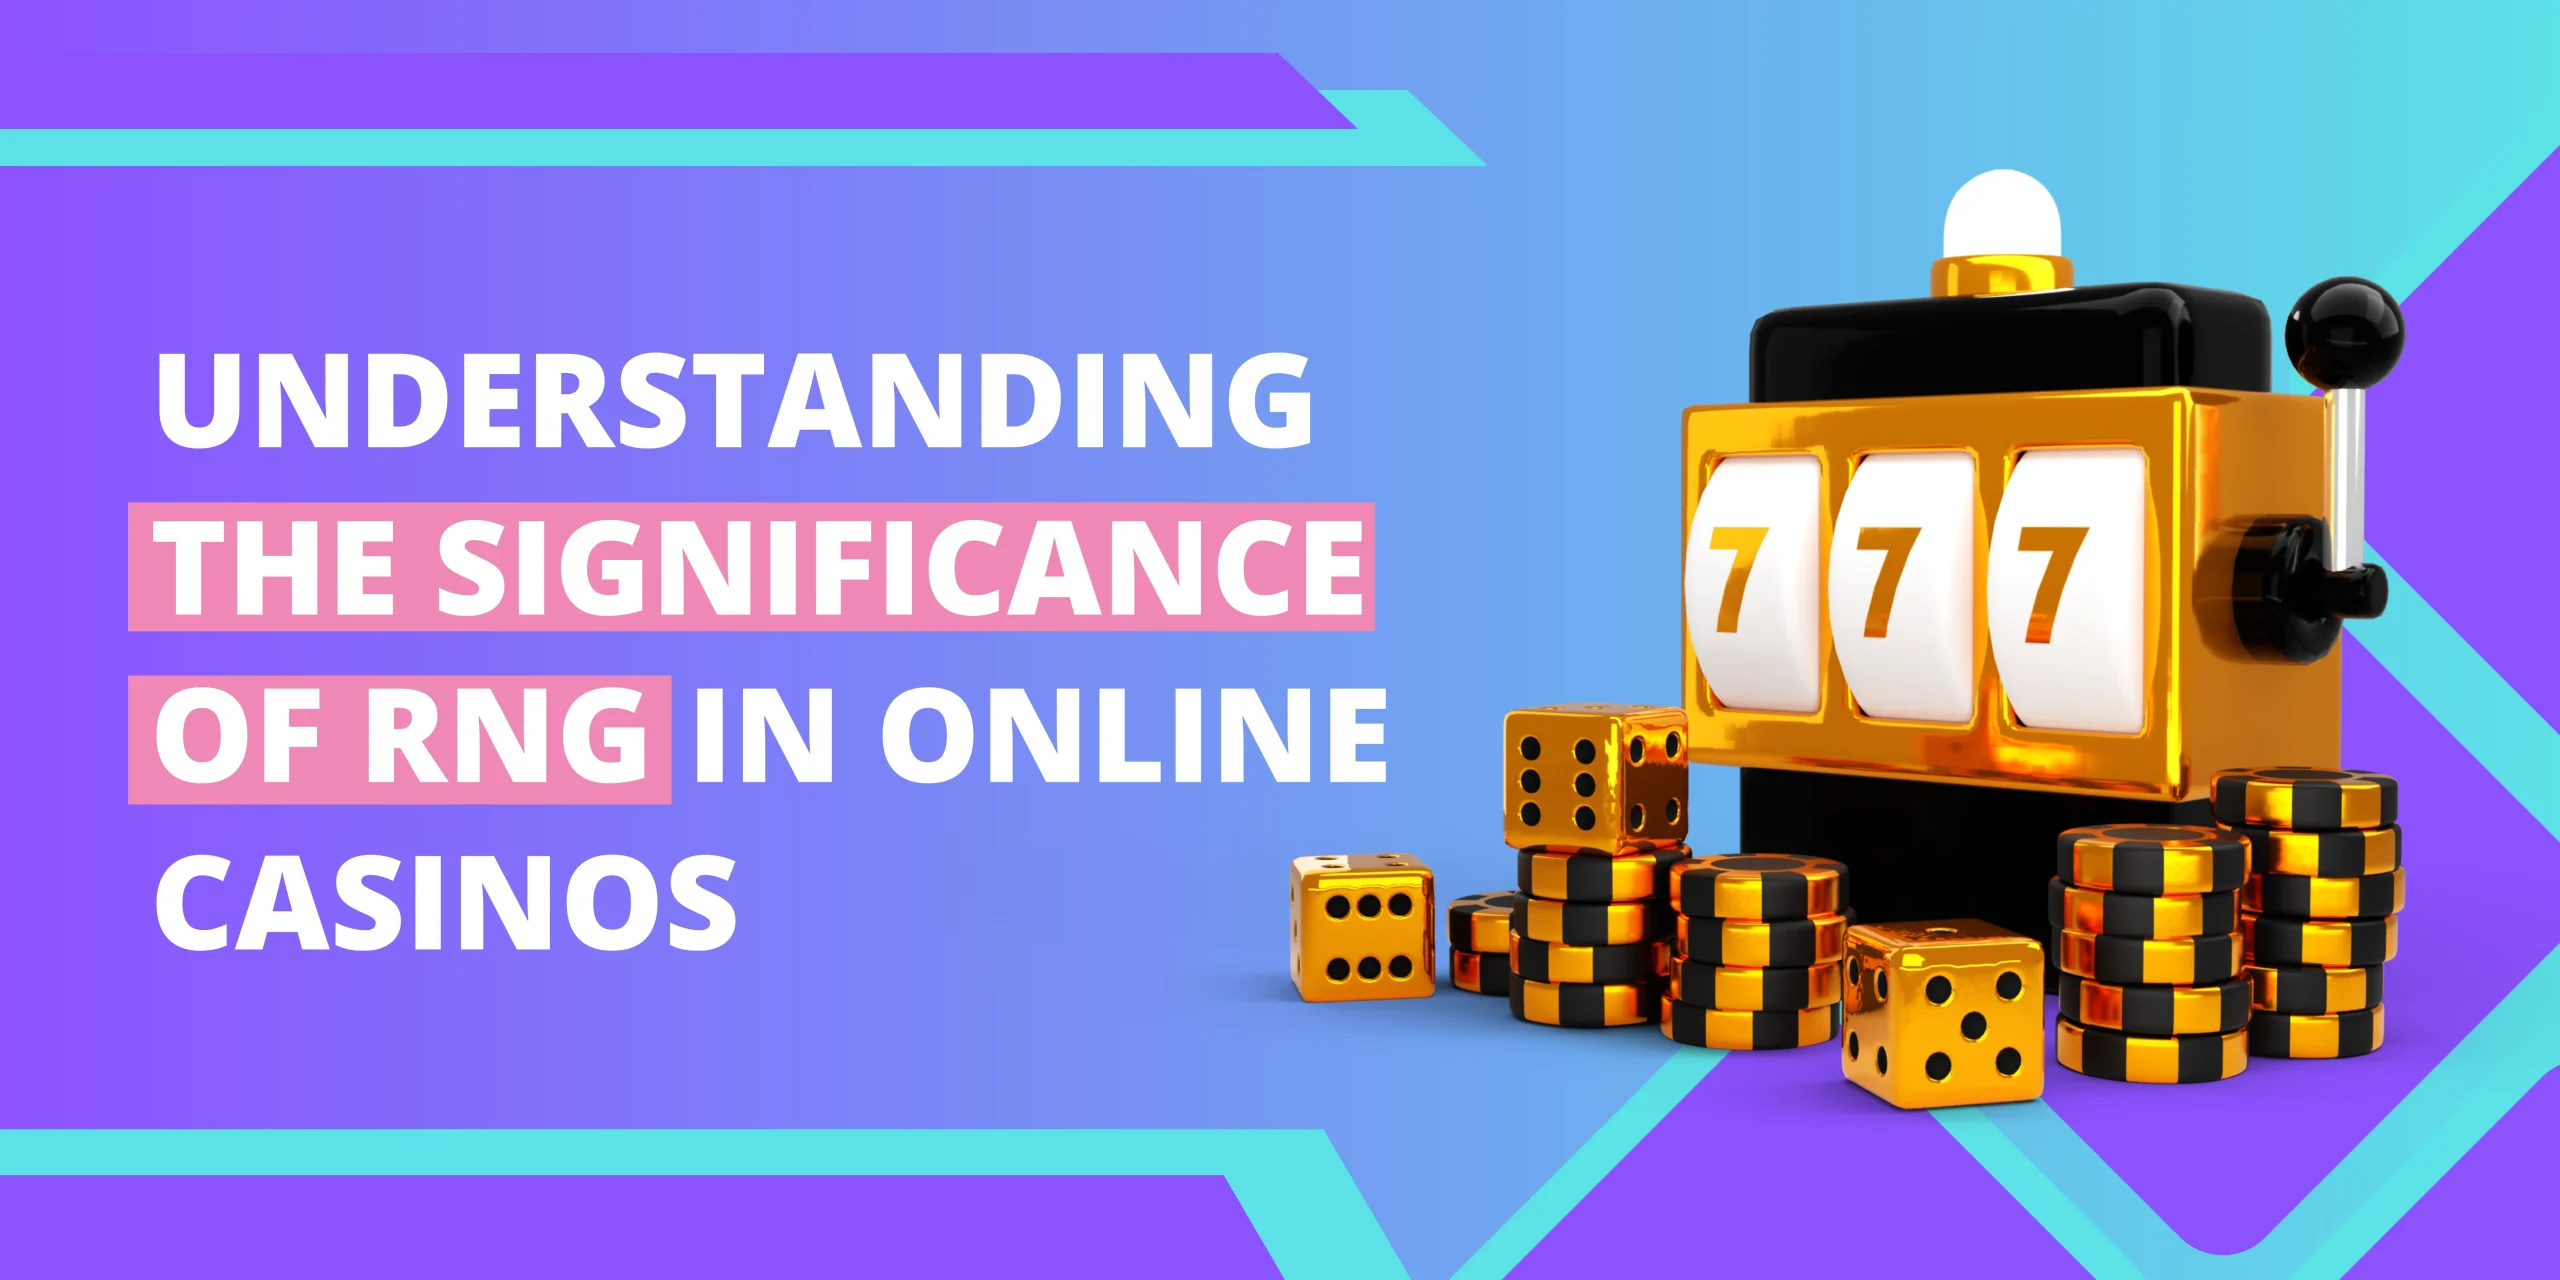 Understanding the Significance of RNG in Online Casinos